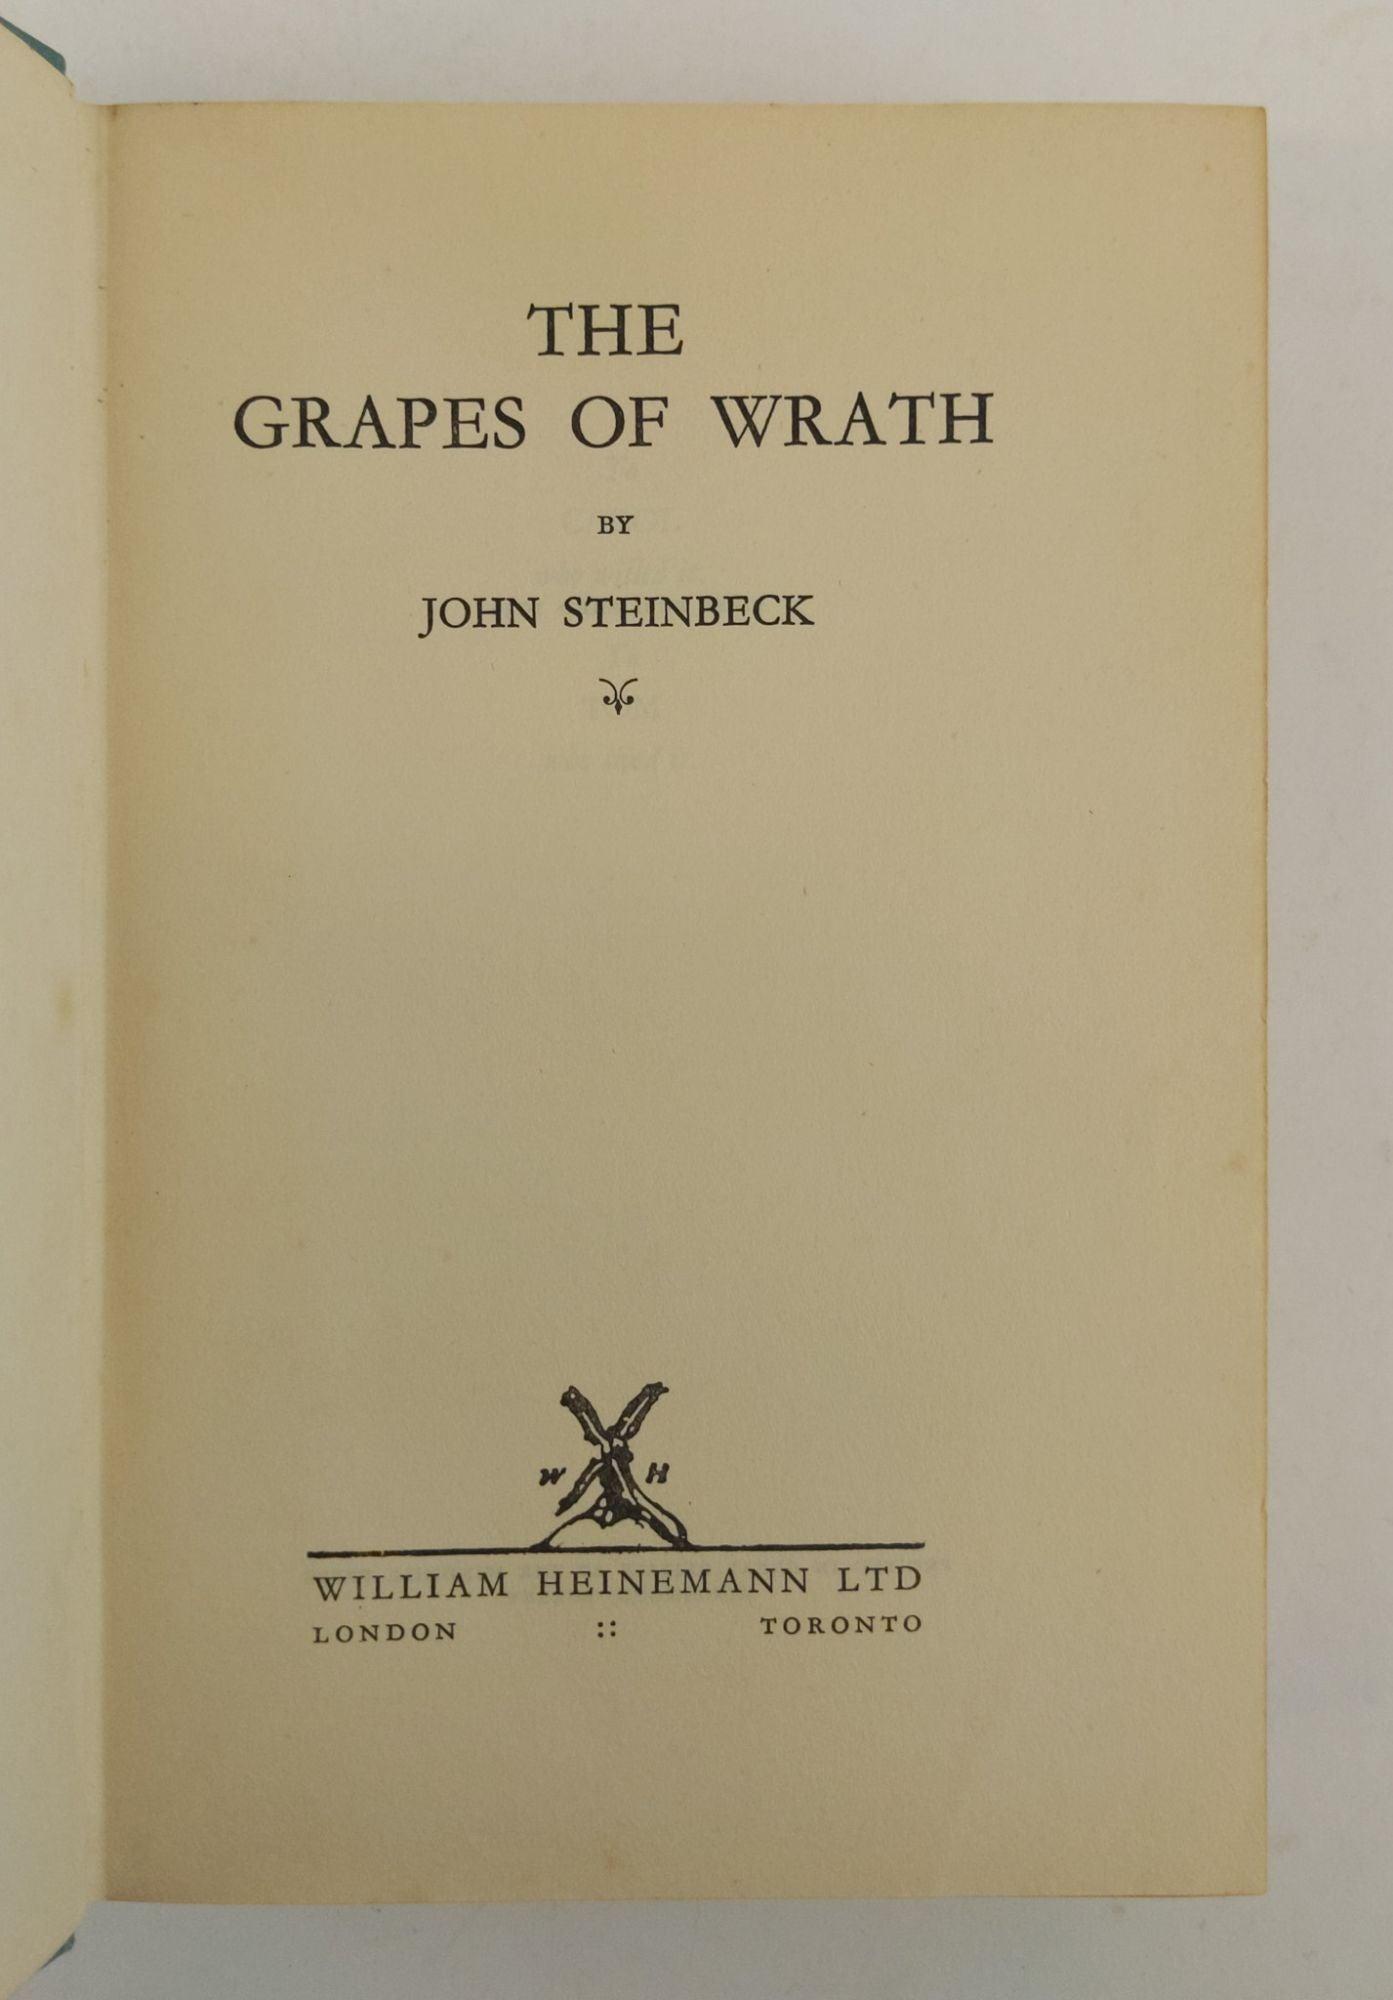 Product Image for THE GRAPES OF WRATH